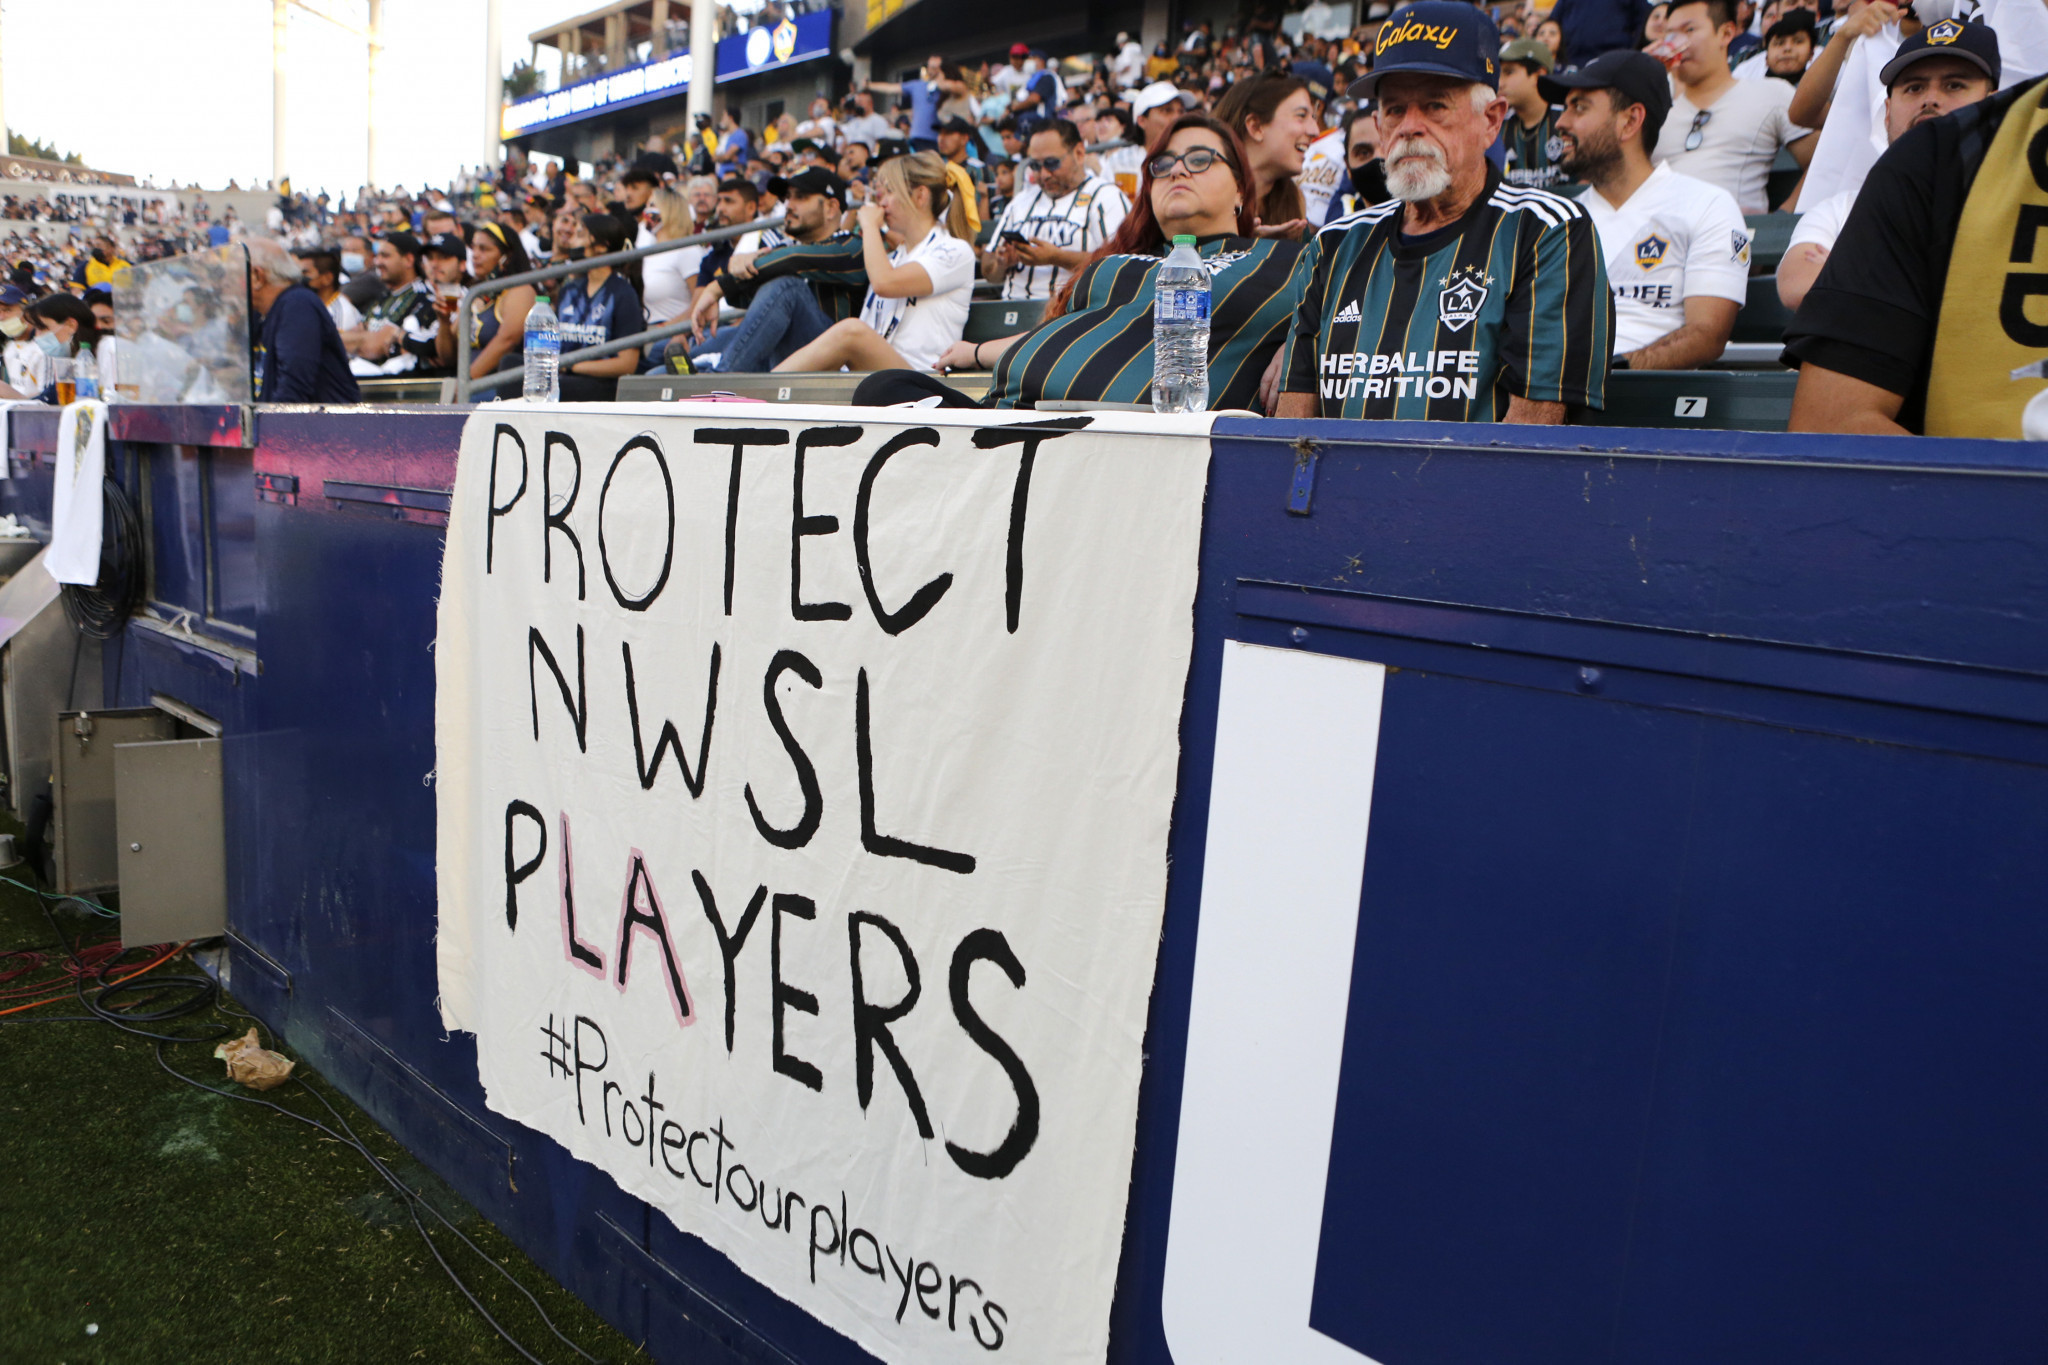 Damning report finds abuse "systemic" in NWSL and US Soccer "failed to put in place basic measures for player safety"